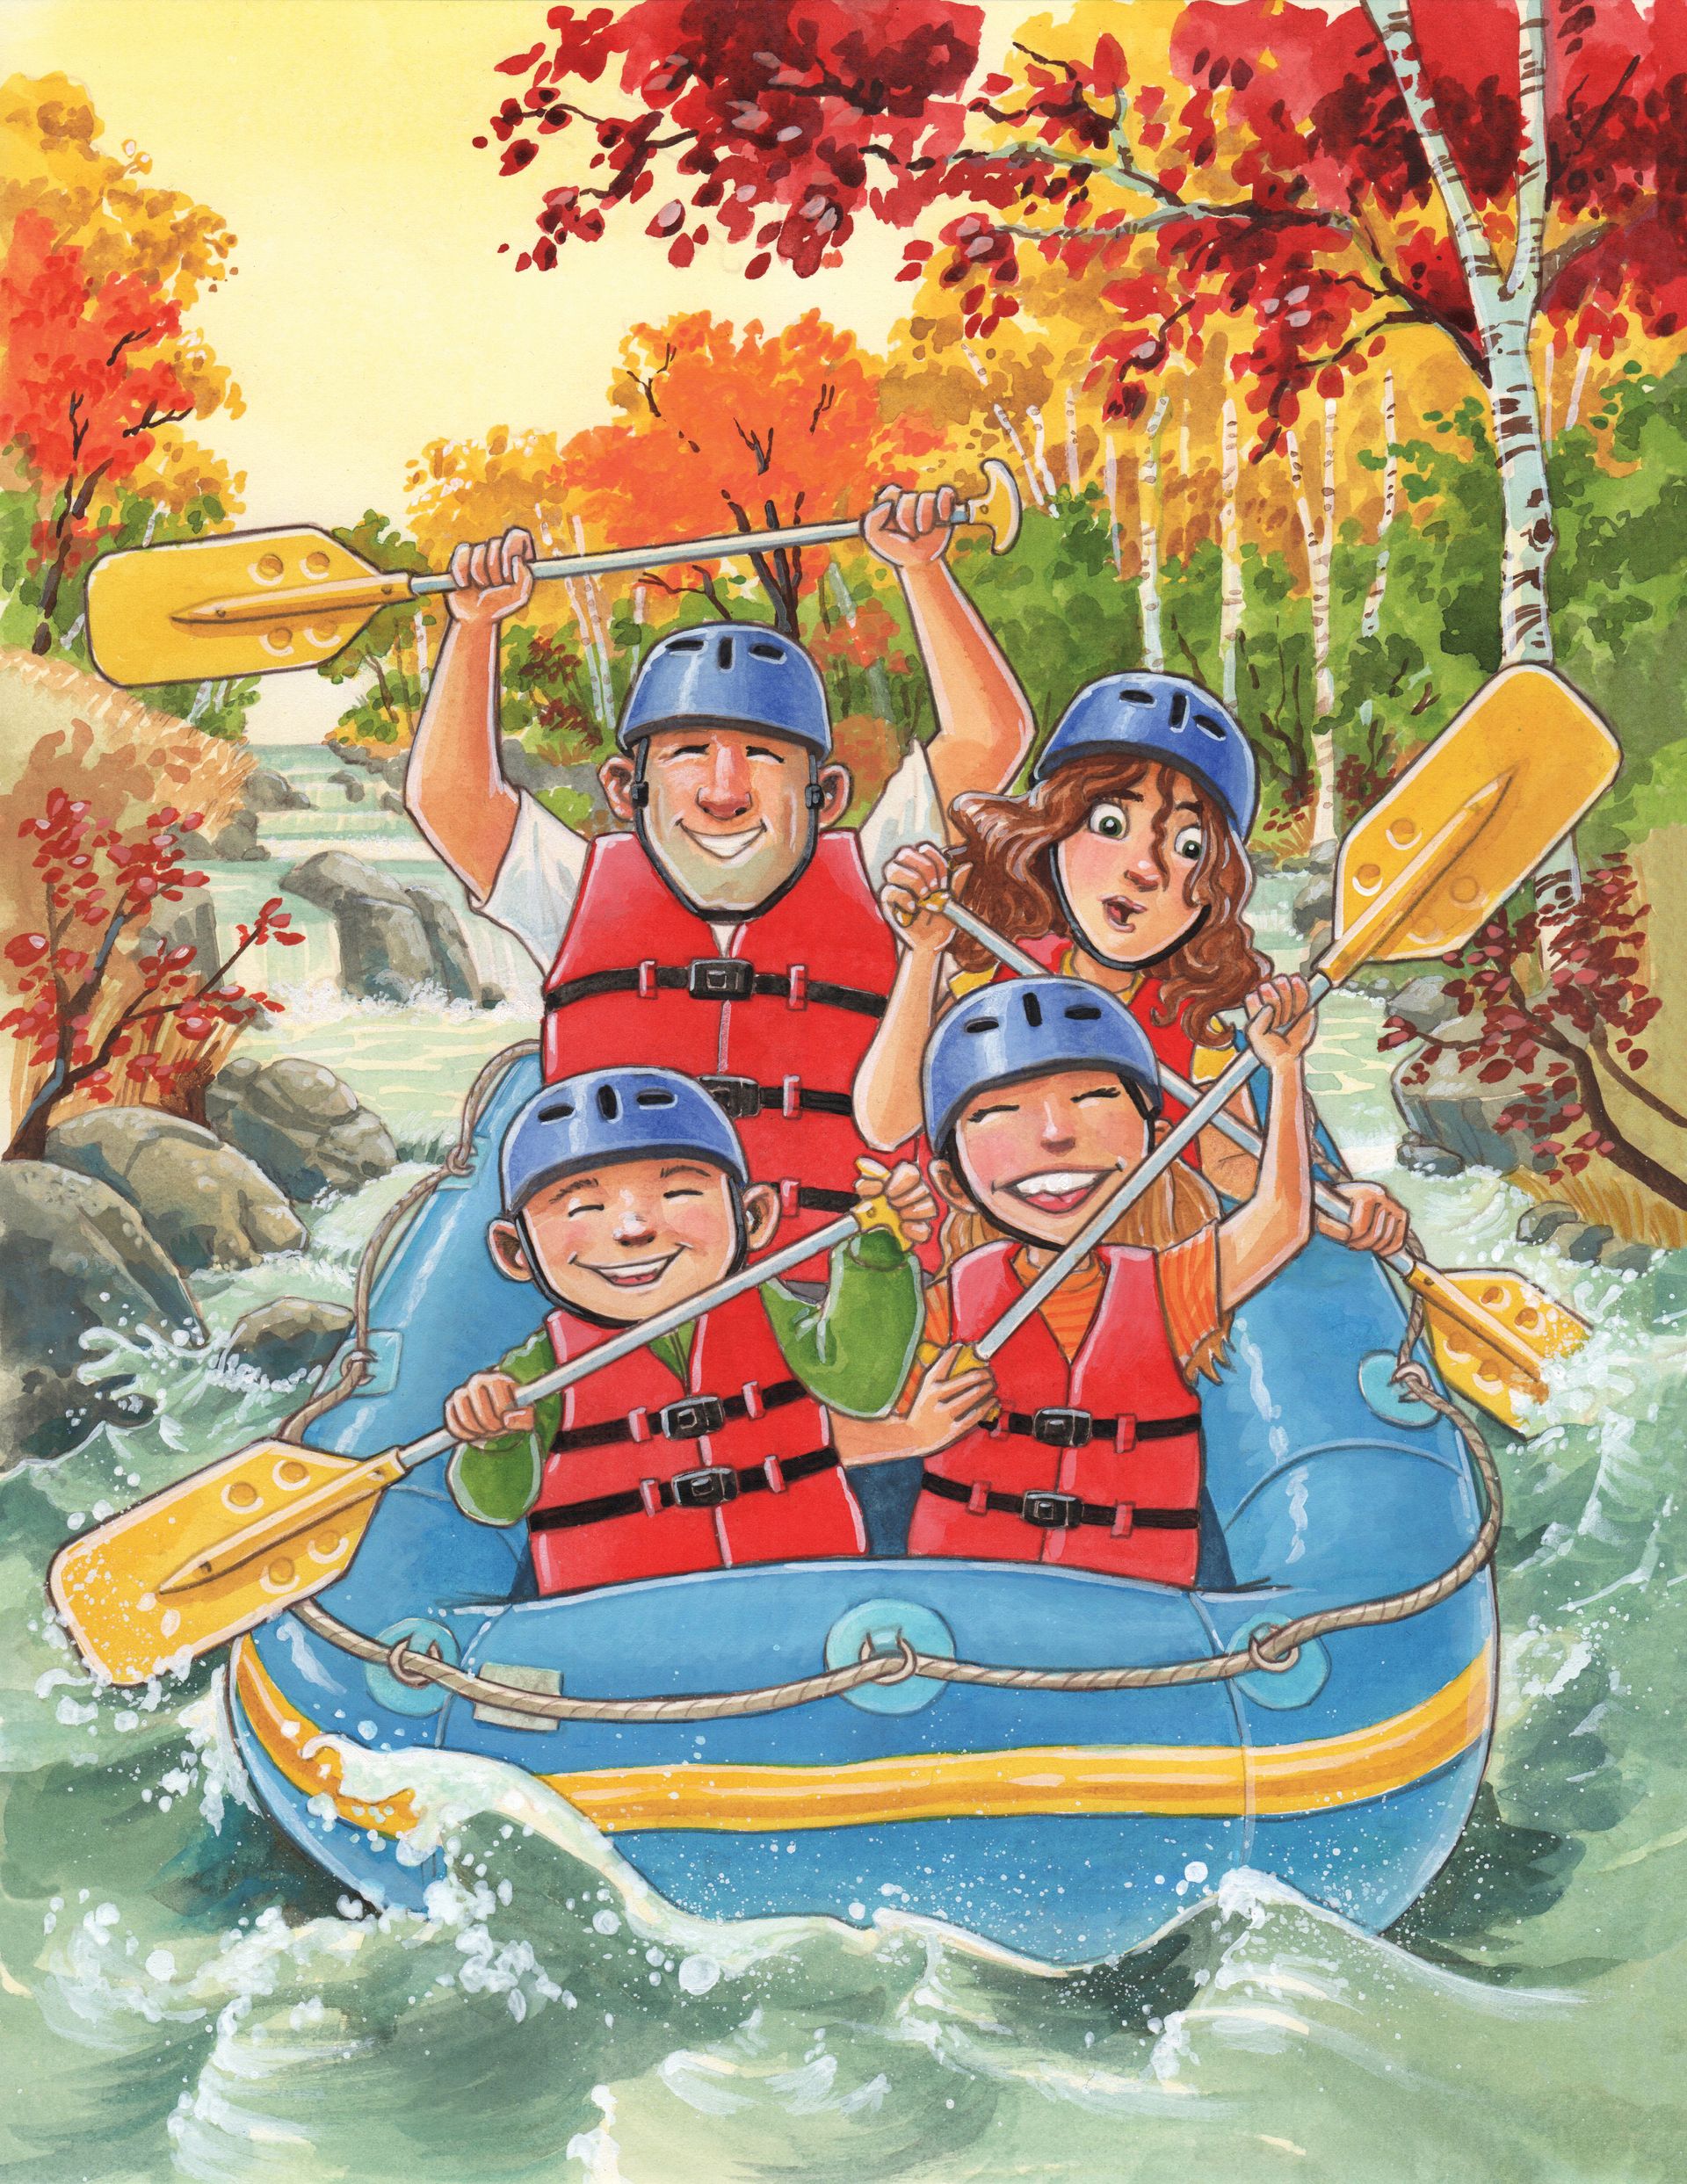 A family goes river rafting together.